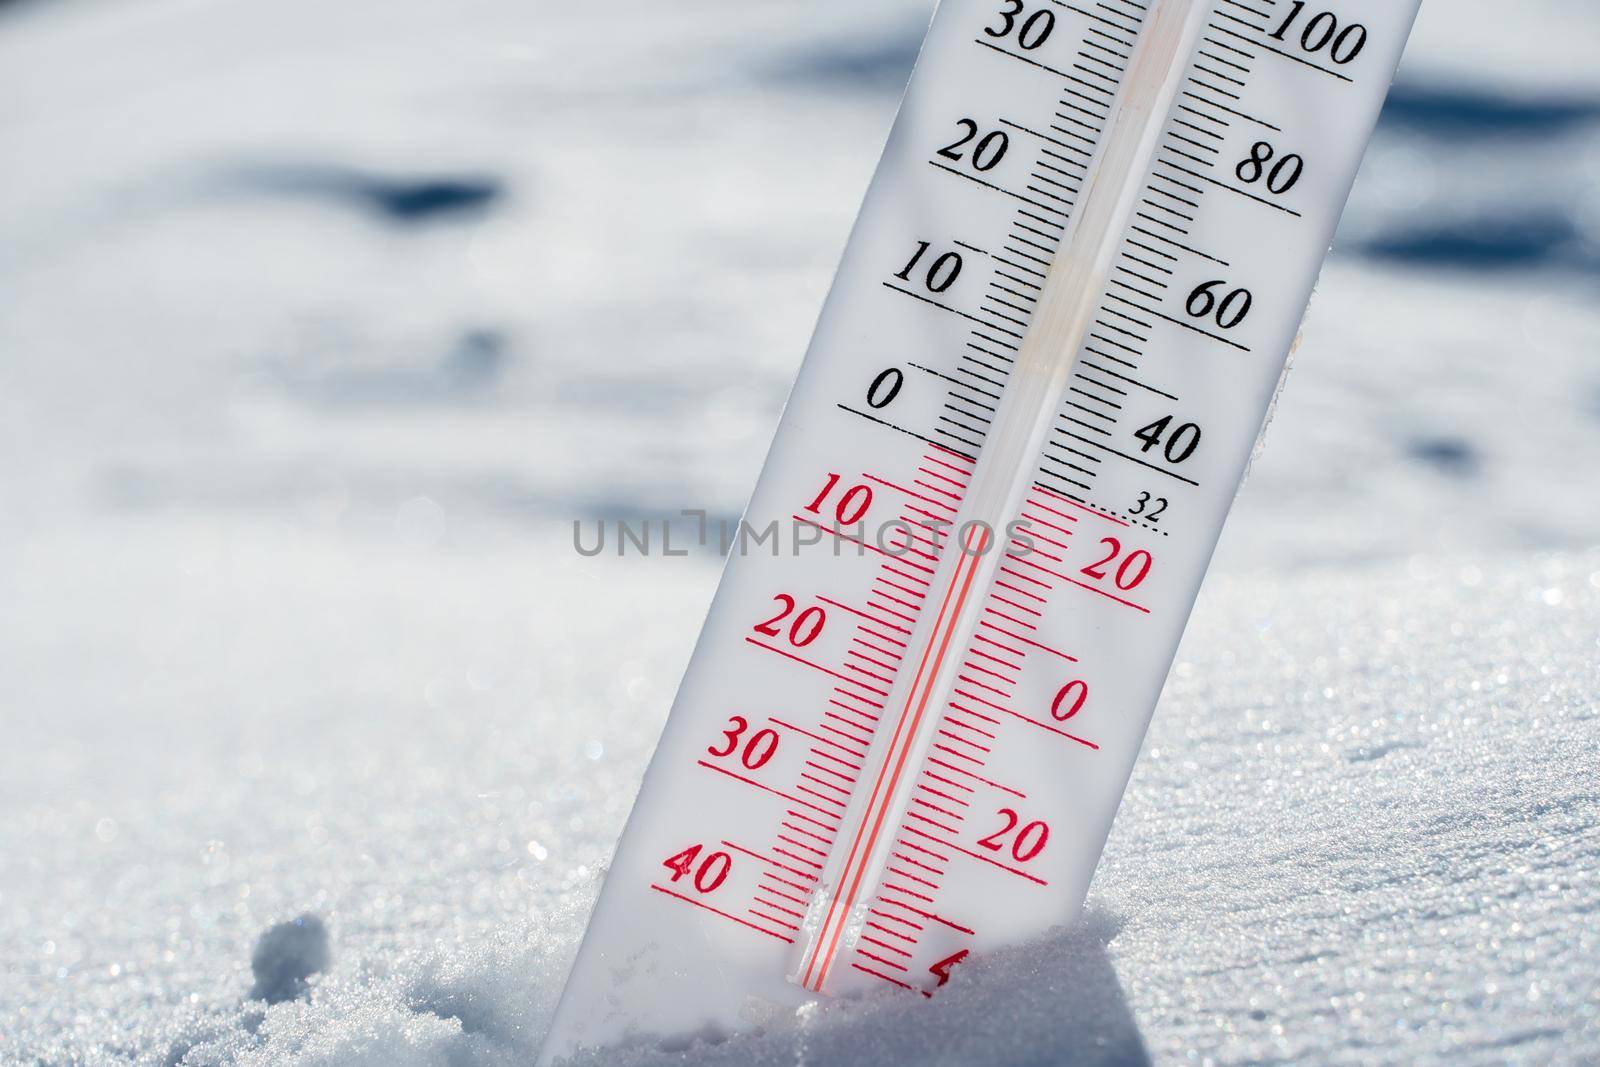 The thermometer lies on the snow in winter showing a negative temperature.Meteorological conditions in a harsh climate in winter with low air and ambient temperatures.Freeze in wintertime.Sunny winter by YevgeniySam